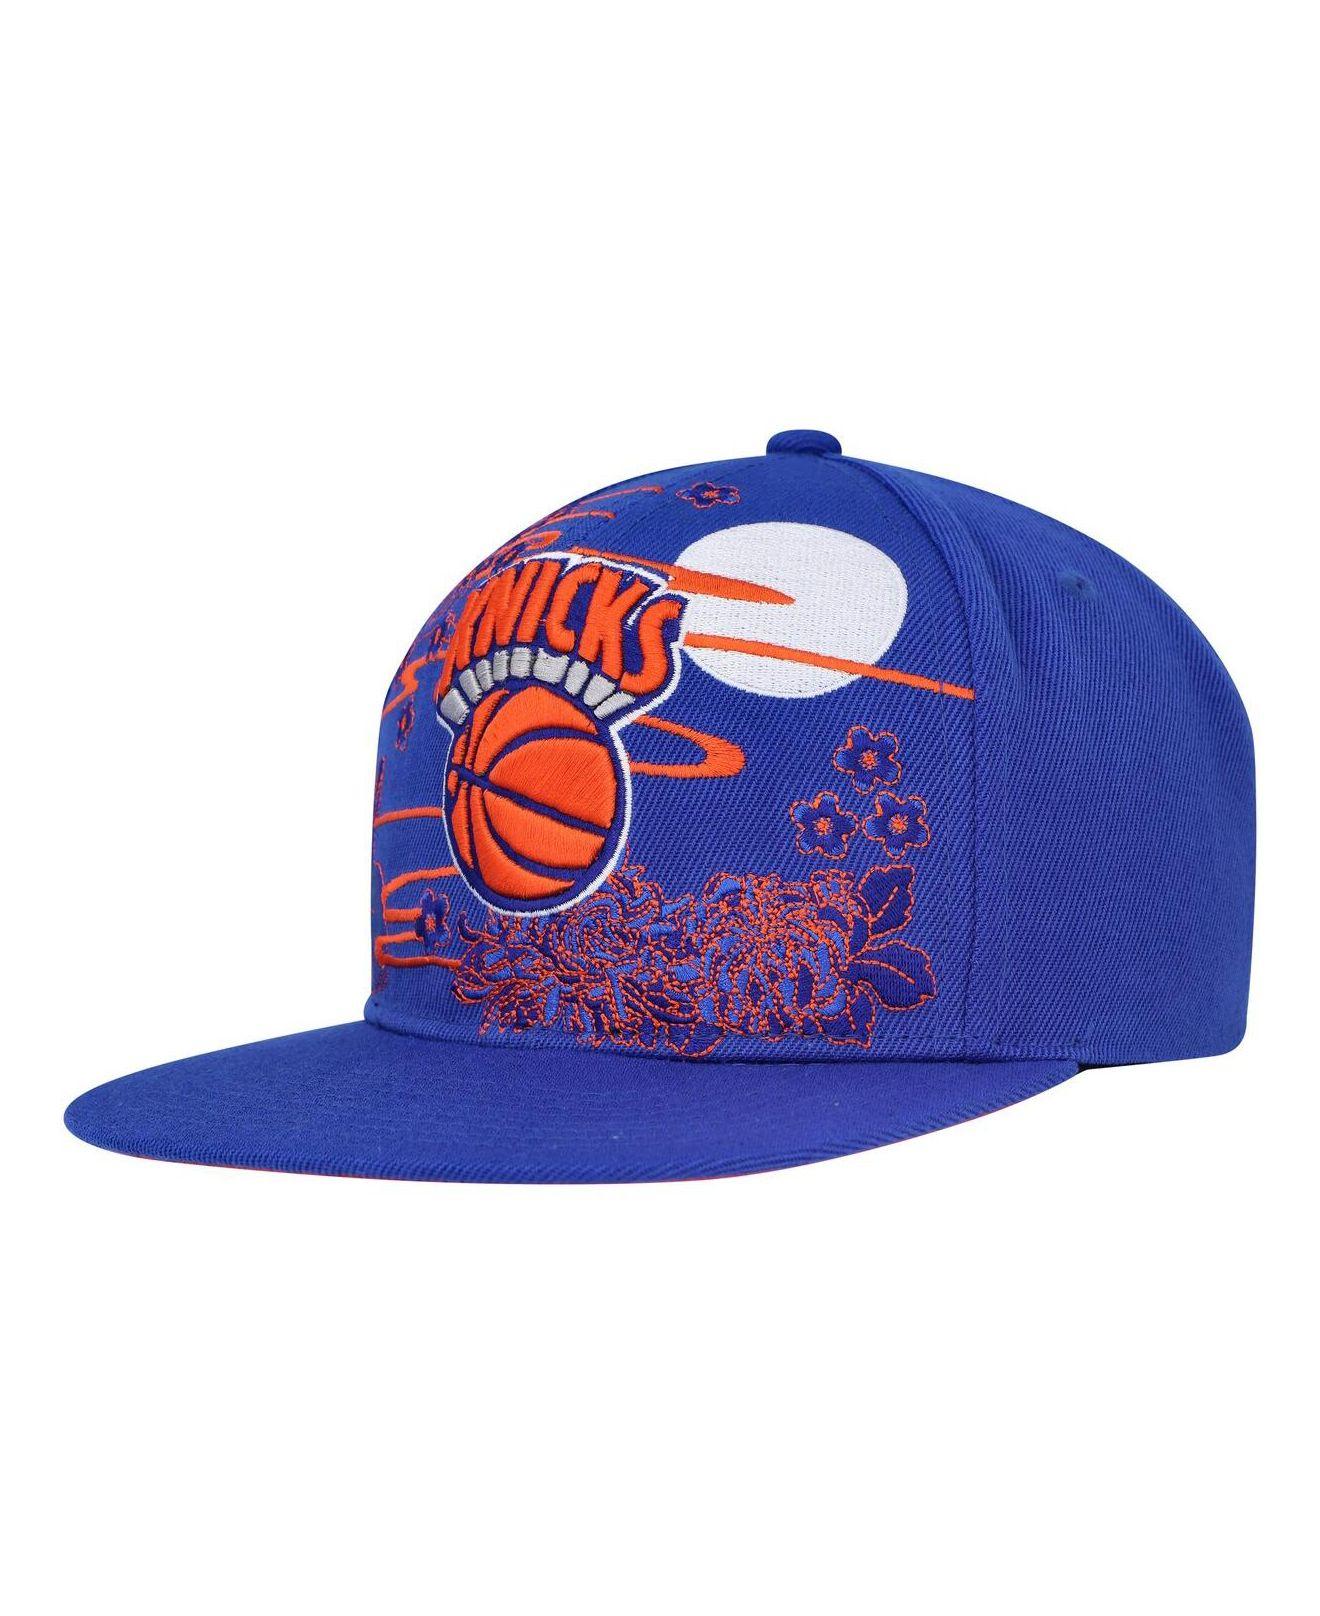 Lids Golden State Warriors Mitchell & Ness 50th Anniversary Snapback Hat -  Royal